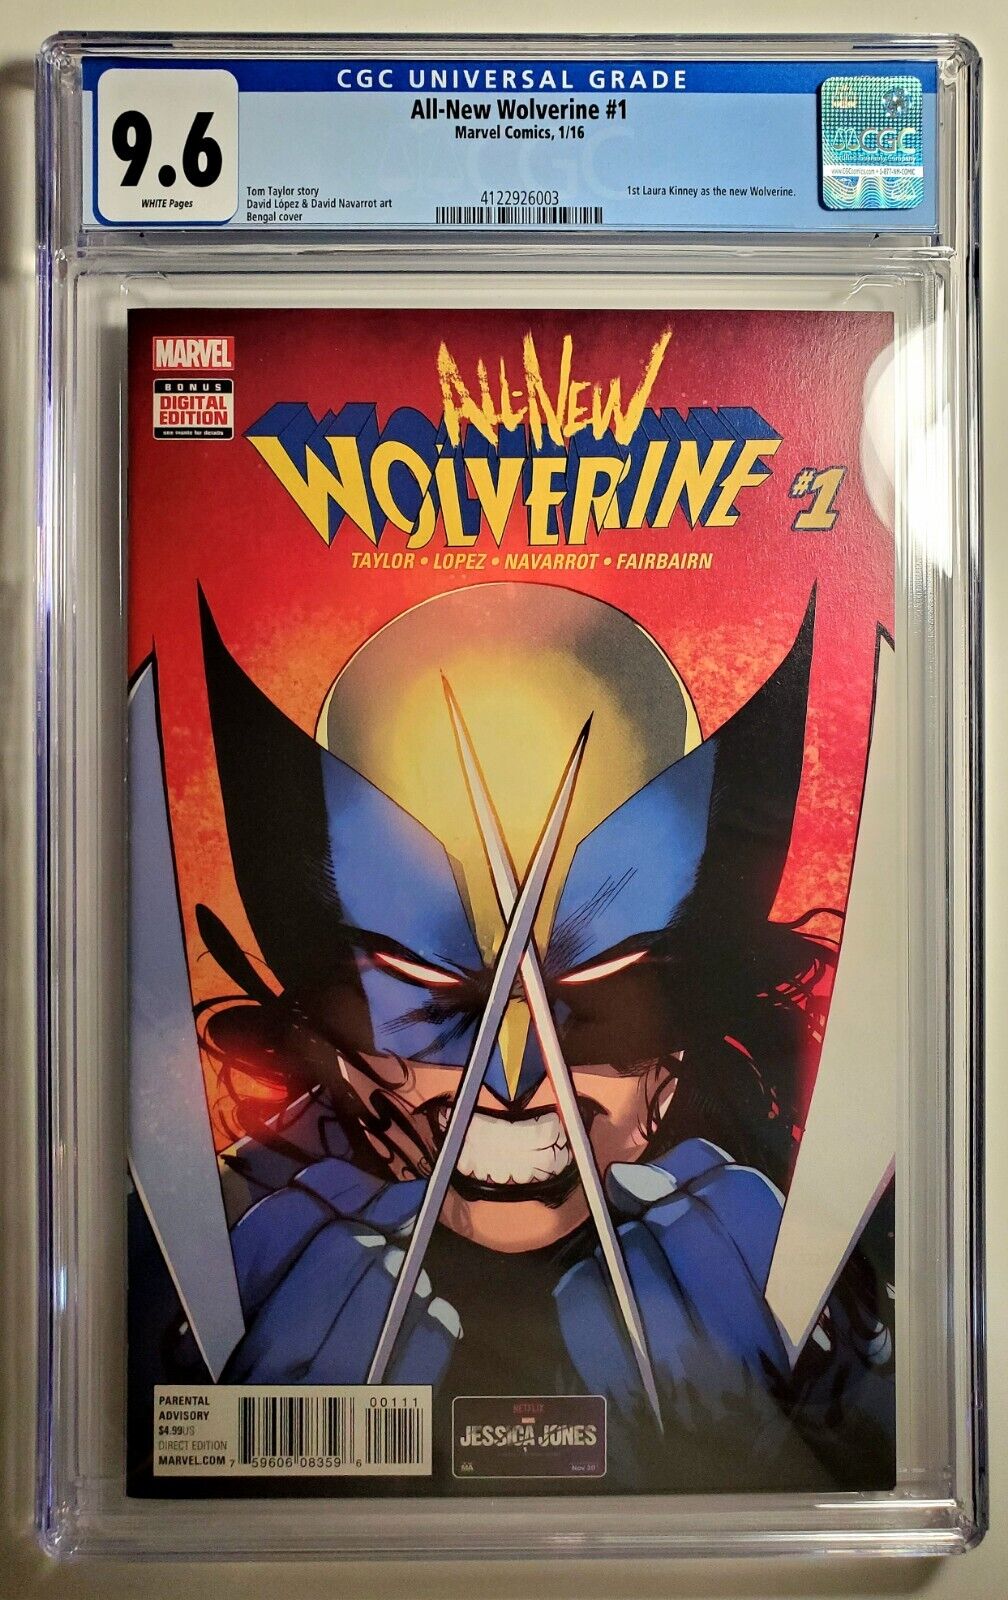 All-New Wolverine #1 CGC 9.6 White Pages 1st Laura Kinney As Wolverine